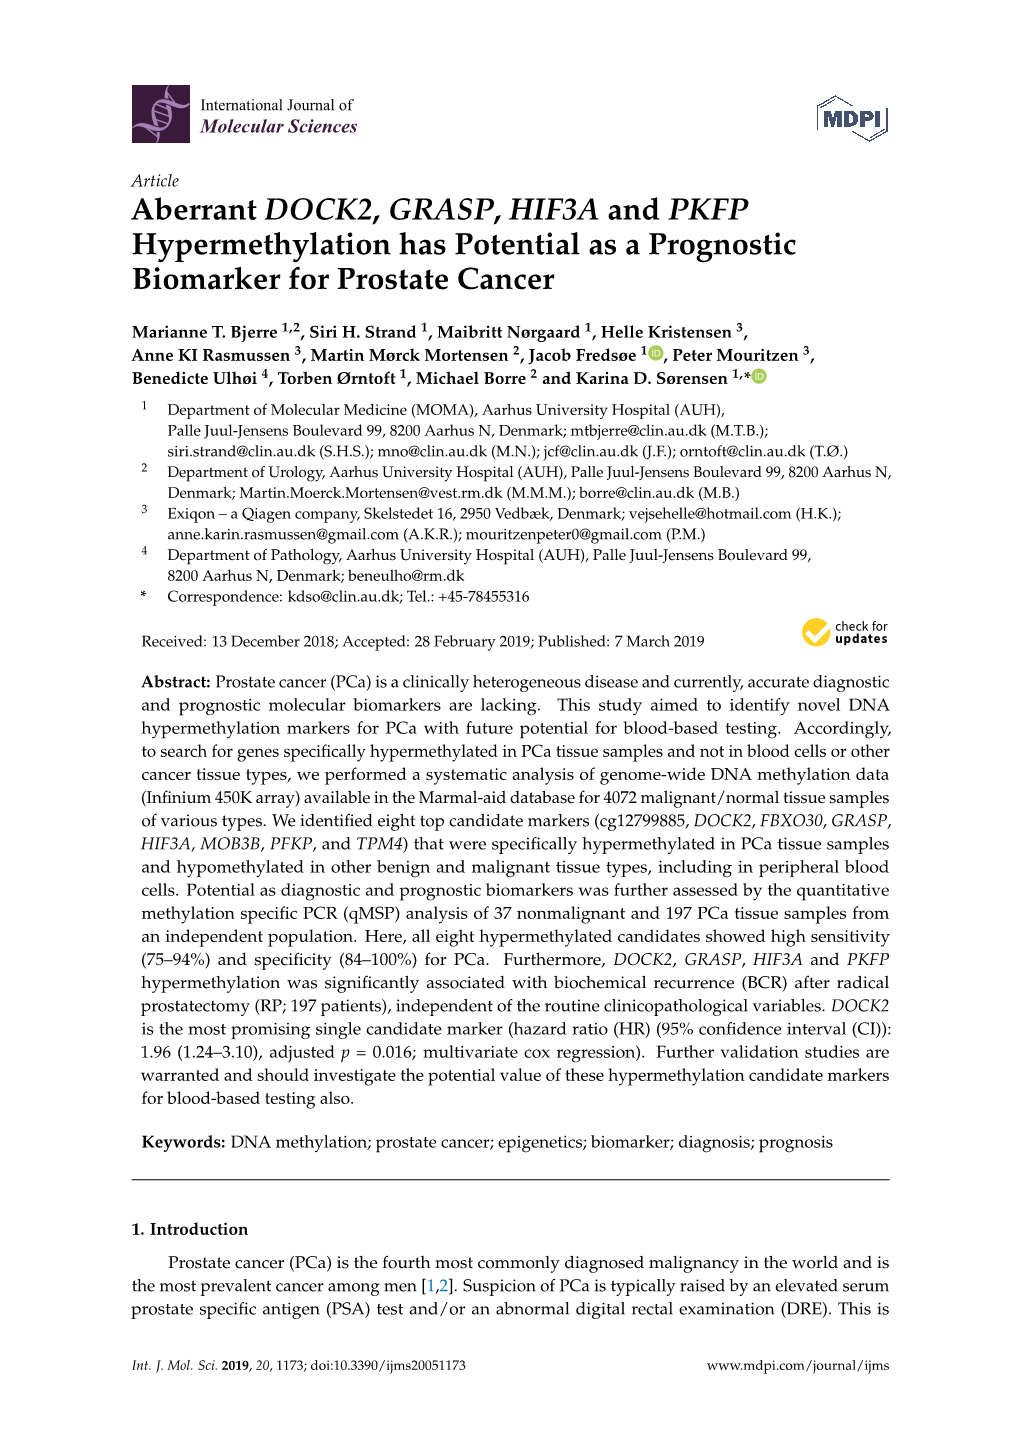 Aberrant DOCK2, GRASP, HIF3A and PKFP Hypermethylation Has Potential As a Prognostic Biomarker for Prostate Cancer